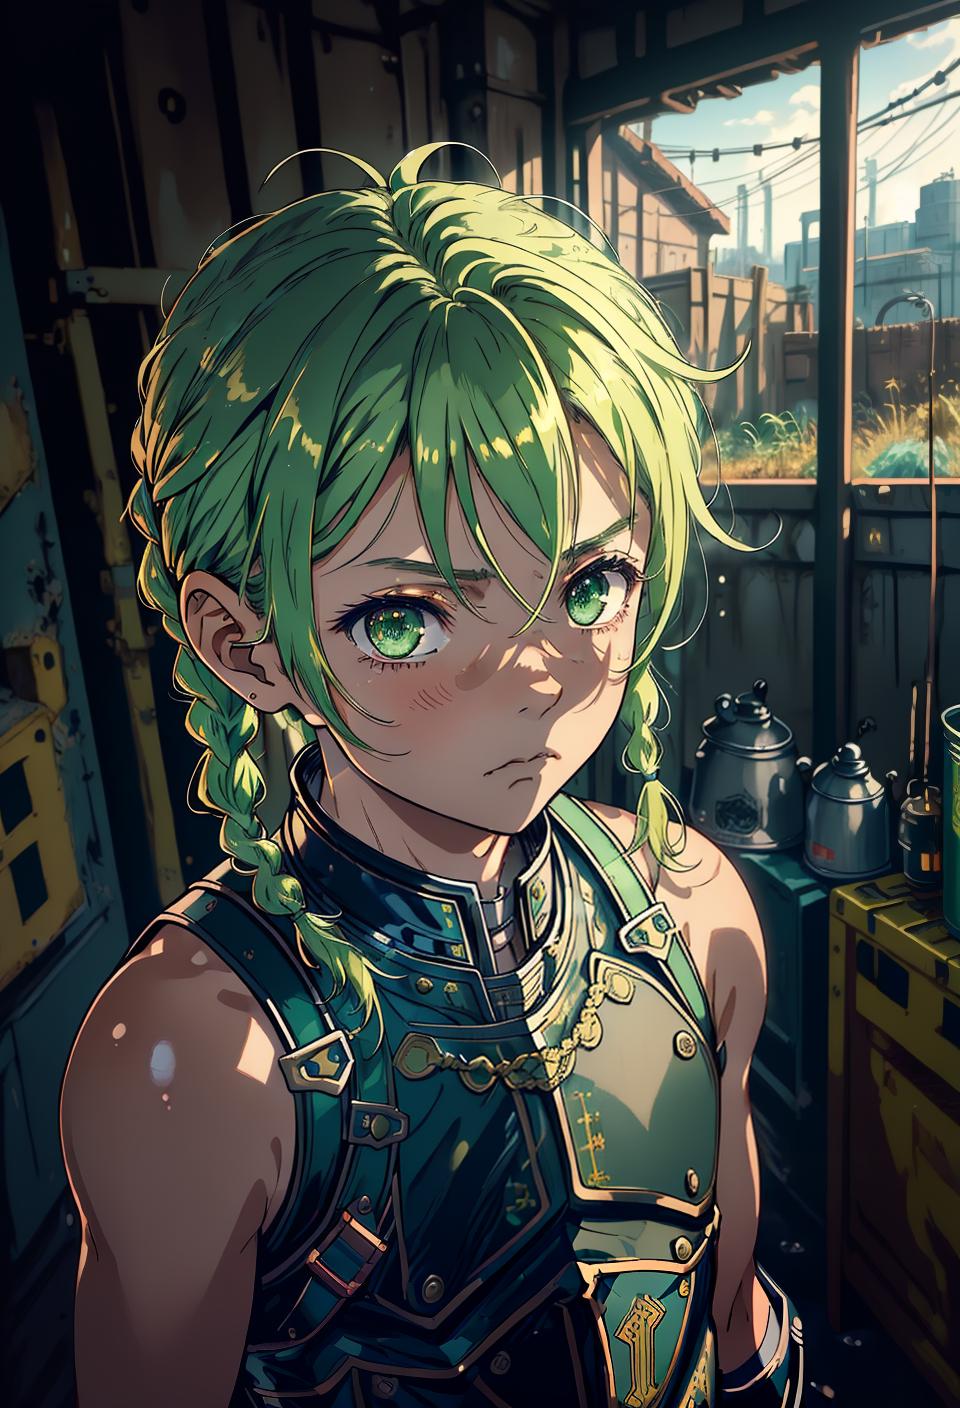  ((trending, highres, masterpiece, cinematic shot)), 1boy, chibi, male knight, rusty factory scene, short straight green hair, hair in braids, large amber eyes, dumb, airheaded personality, worried expression, tanned skin, magical, observant